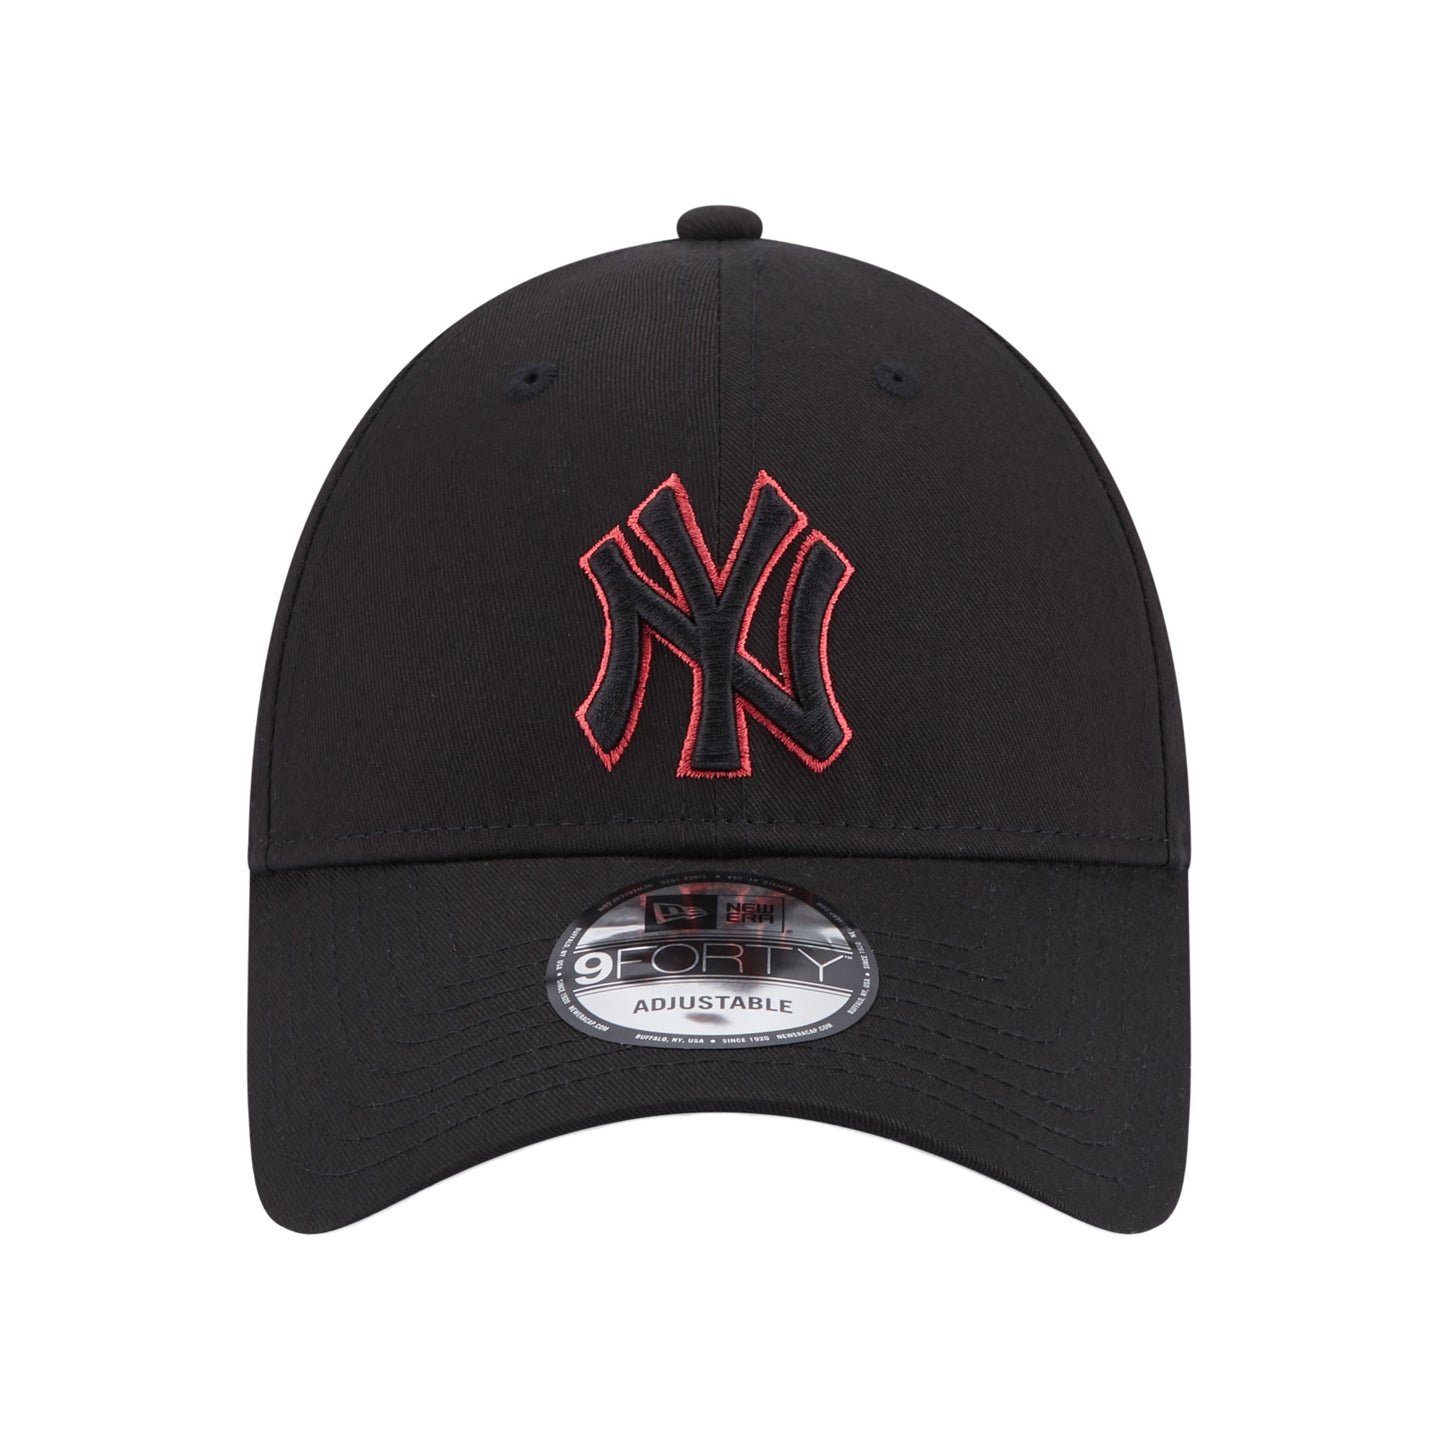 New York Yankees 9FORTY New Era Cap black red outline